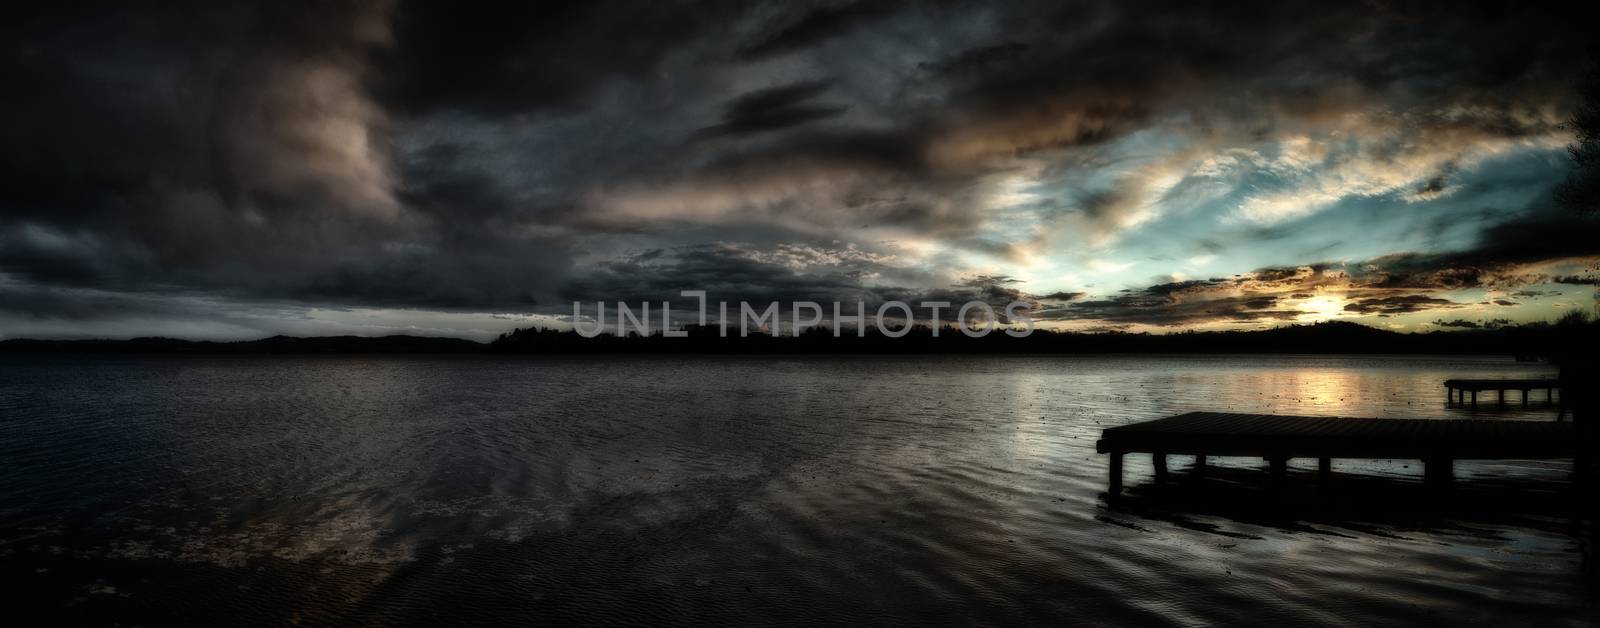 Sunset over the Lake of Varese with dramatic clouds and pier in the foreground